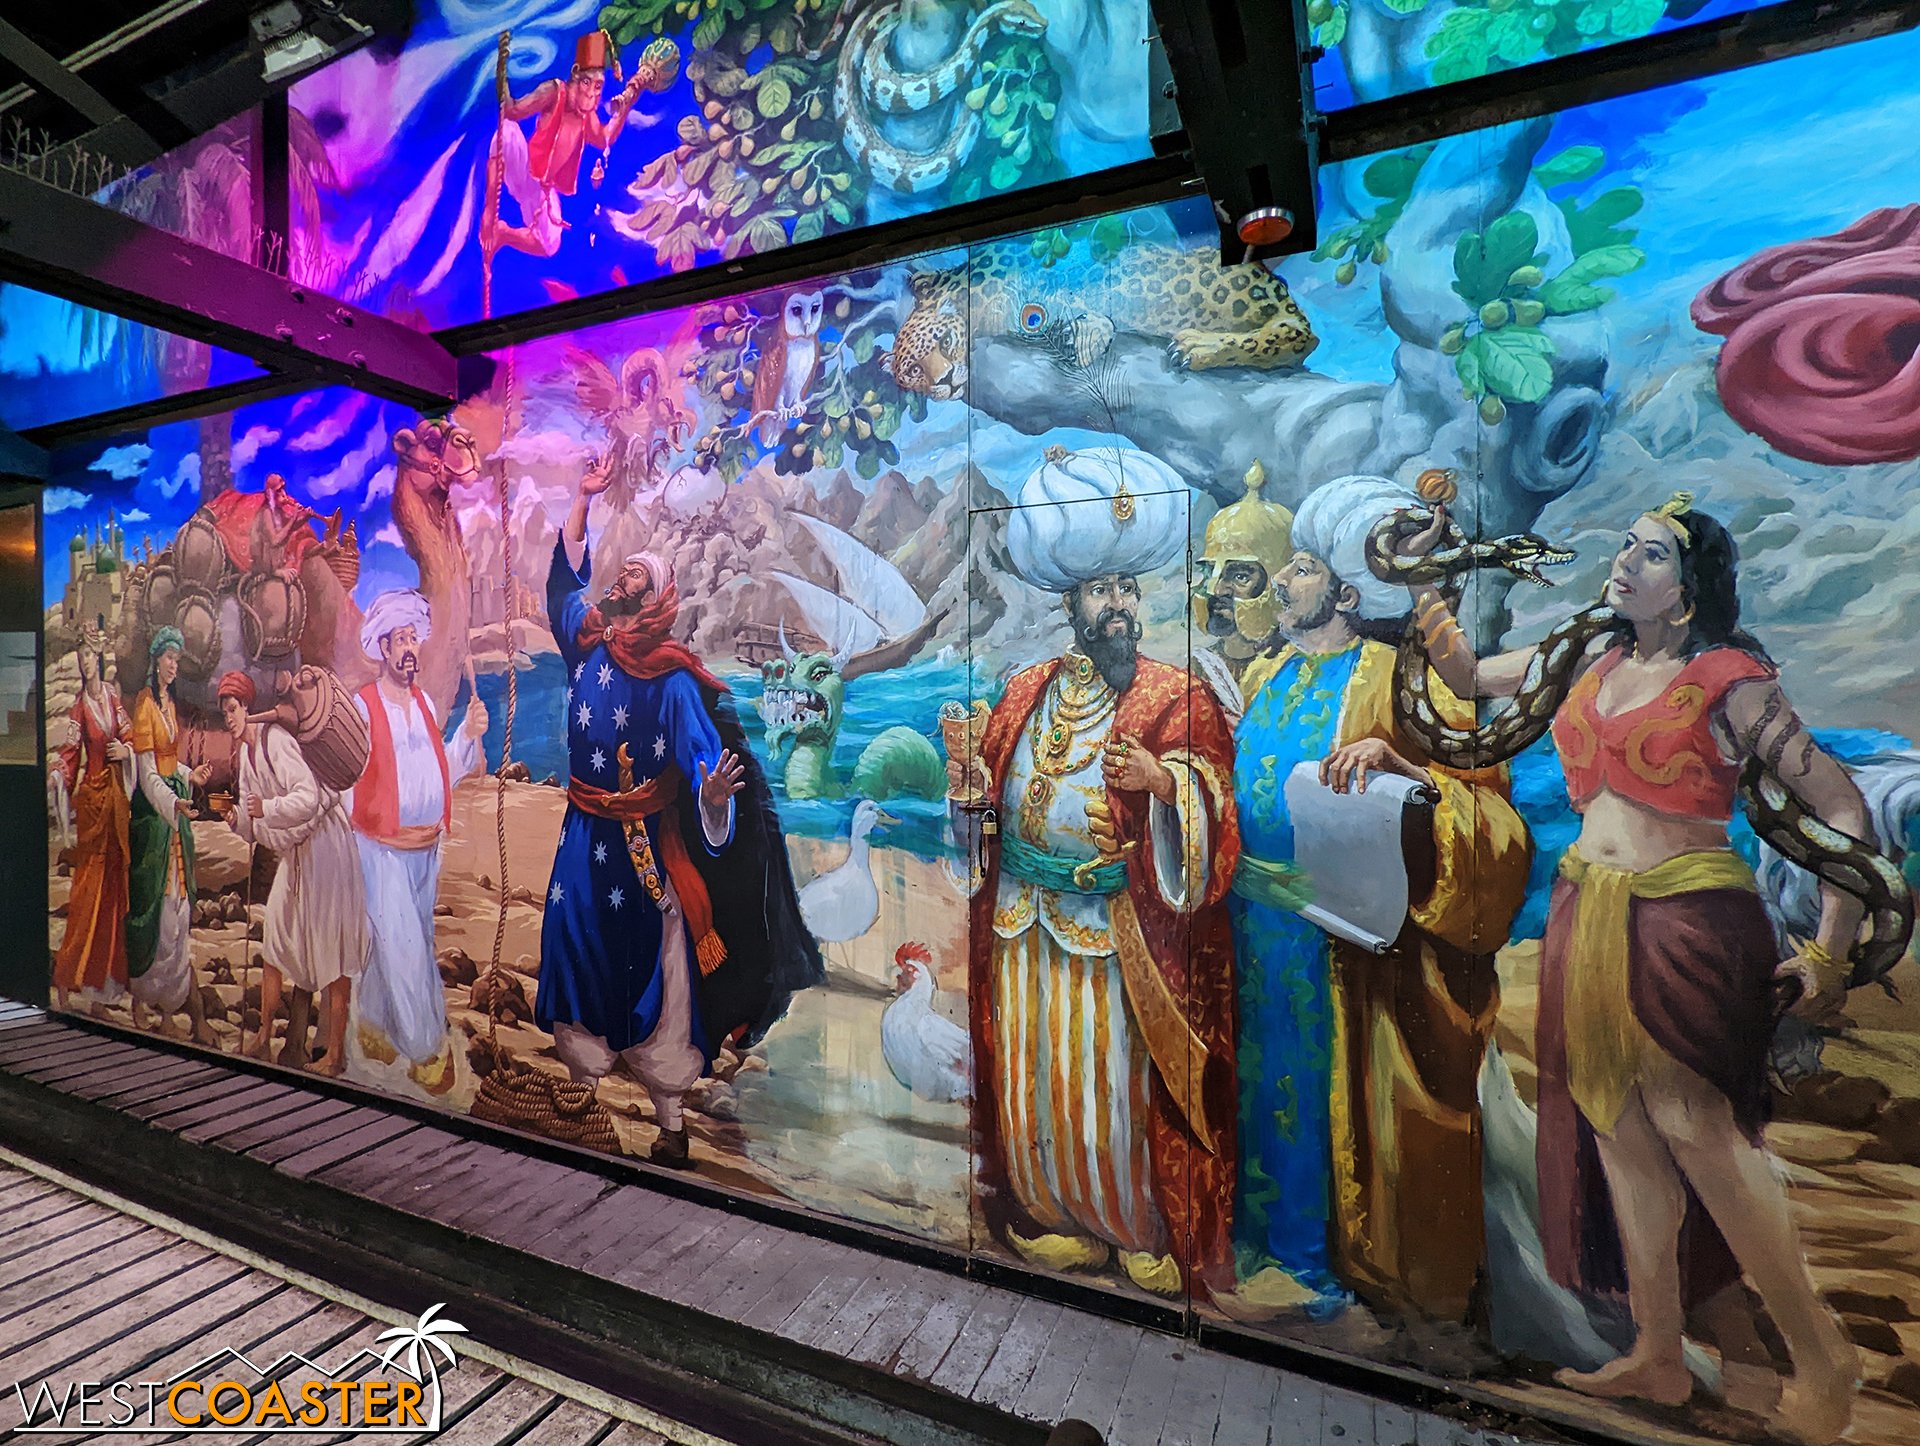  At the loading station, there is a beautiful mural that stretches the length of the platform! 